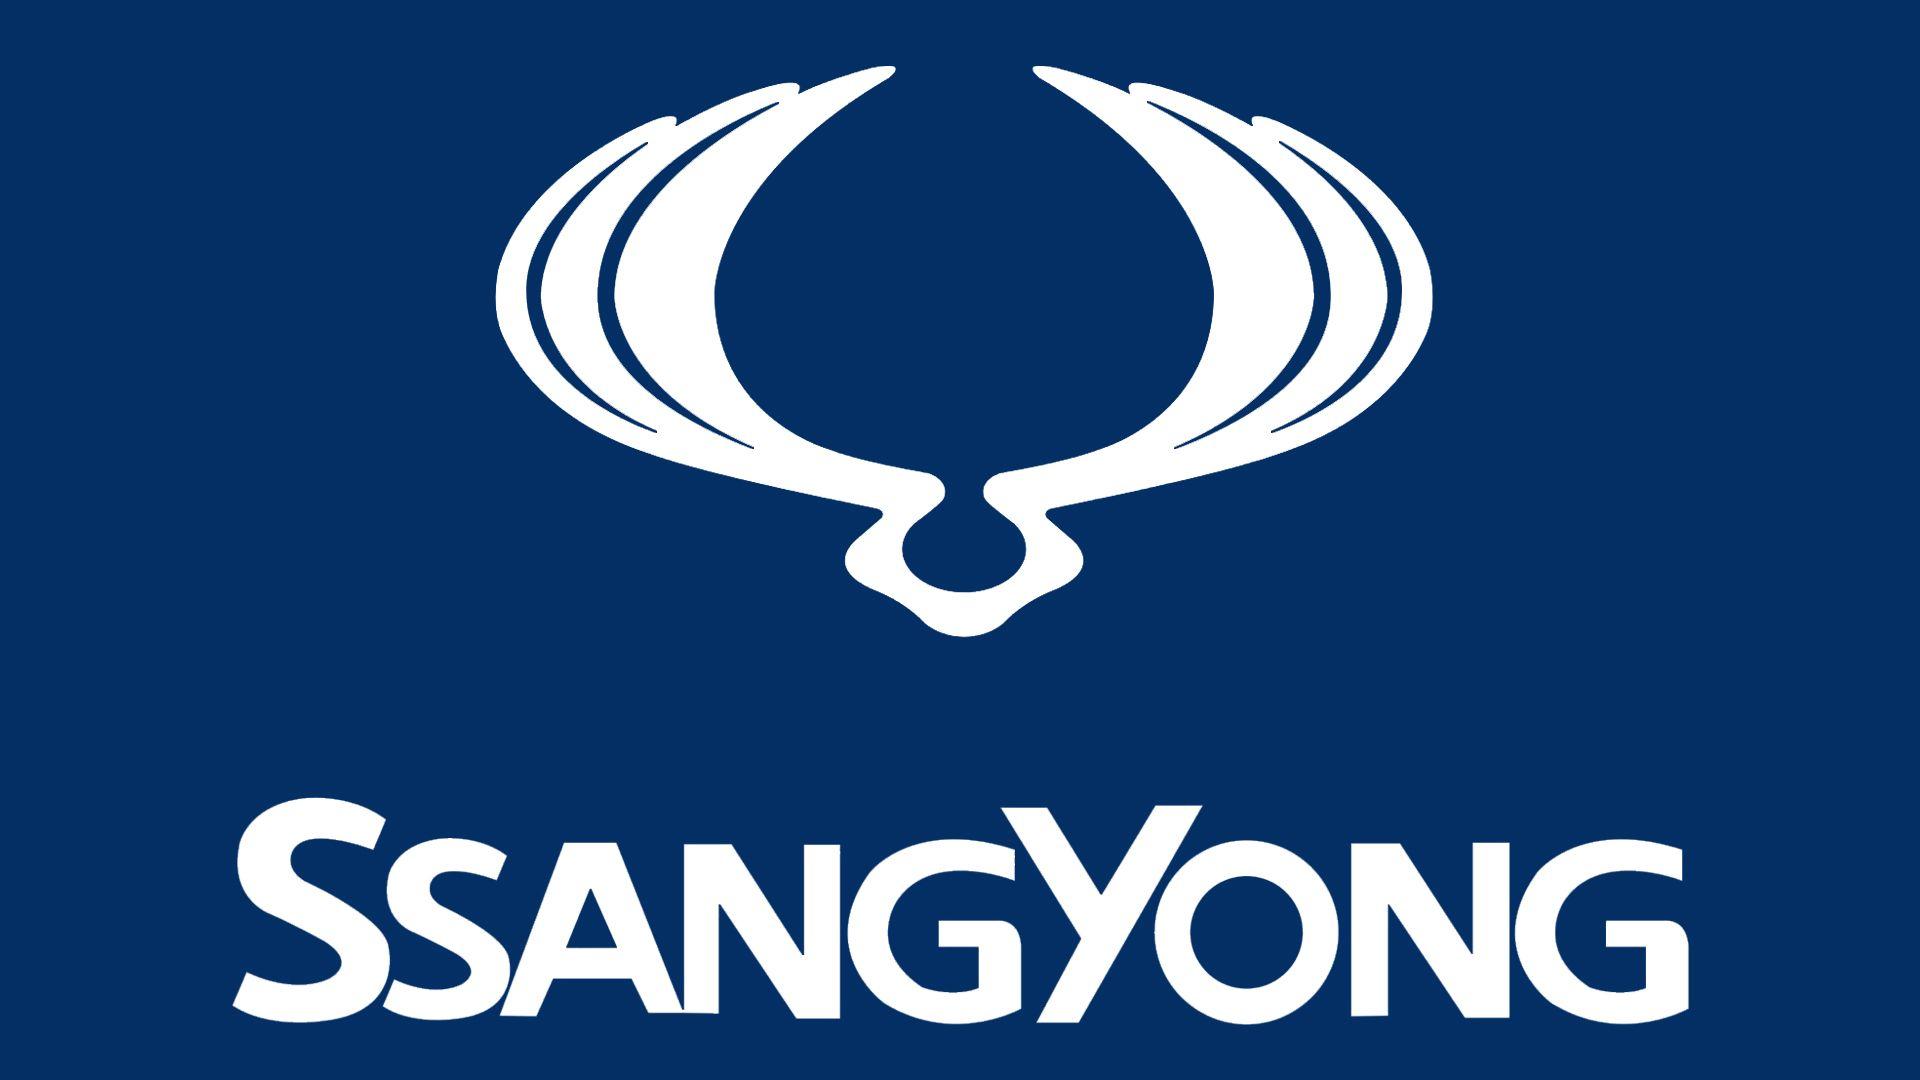 SsangYong Logo - SsangYong Logo Meaning and History, latest models | World Cars Brands